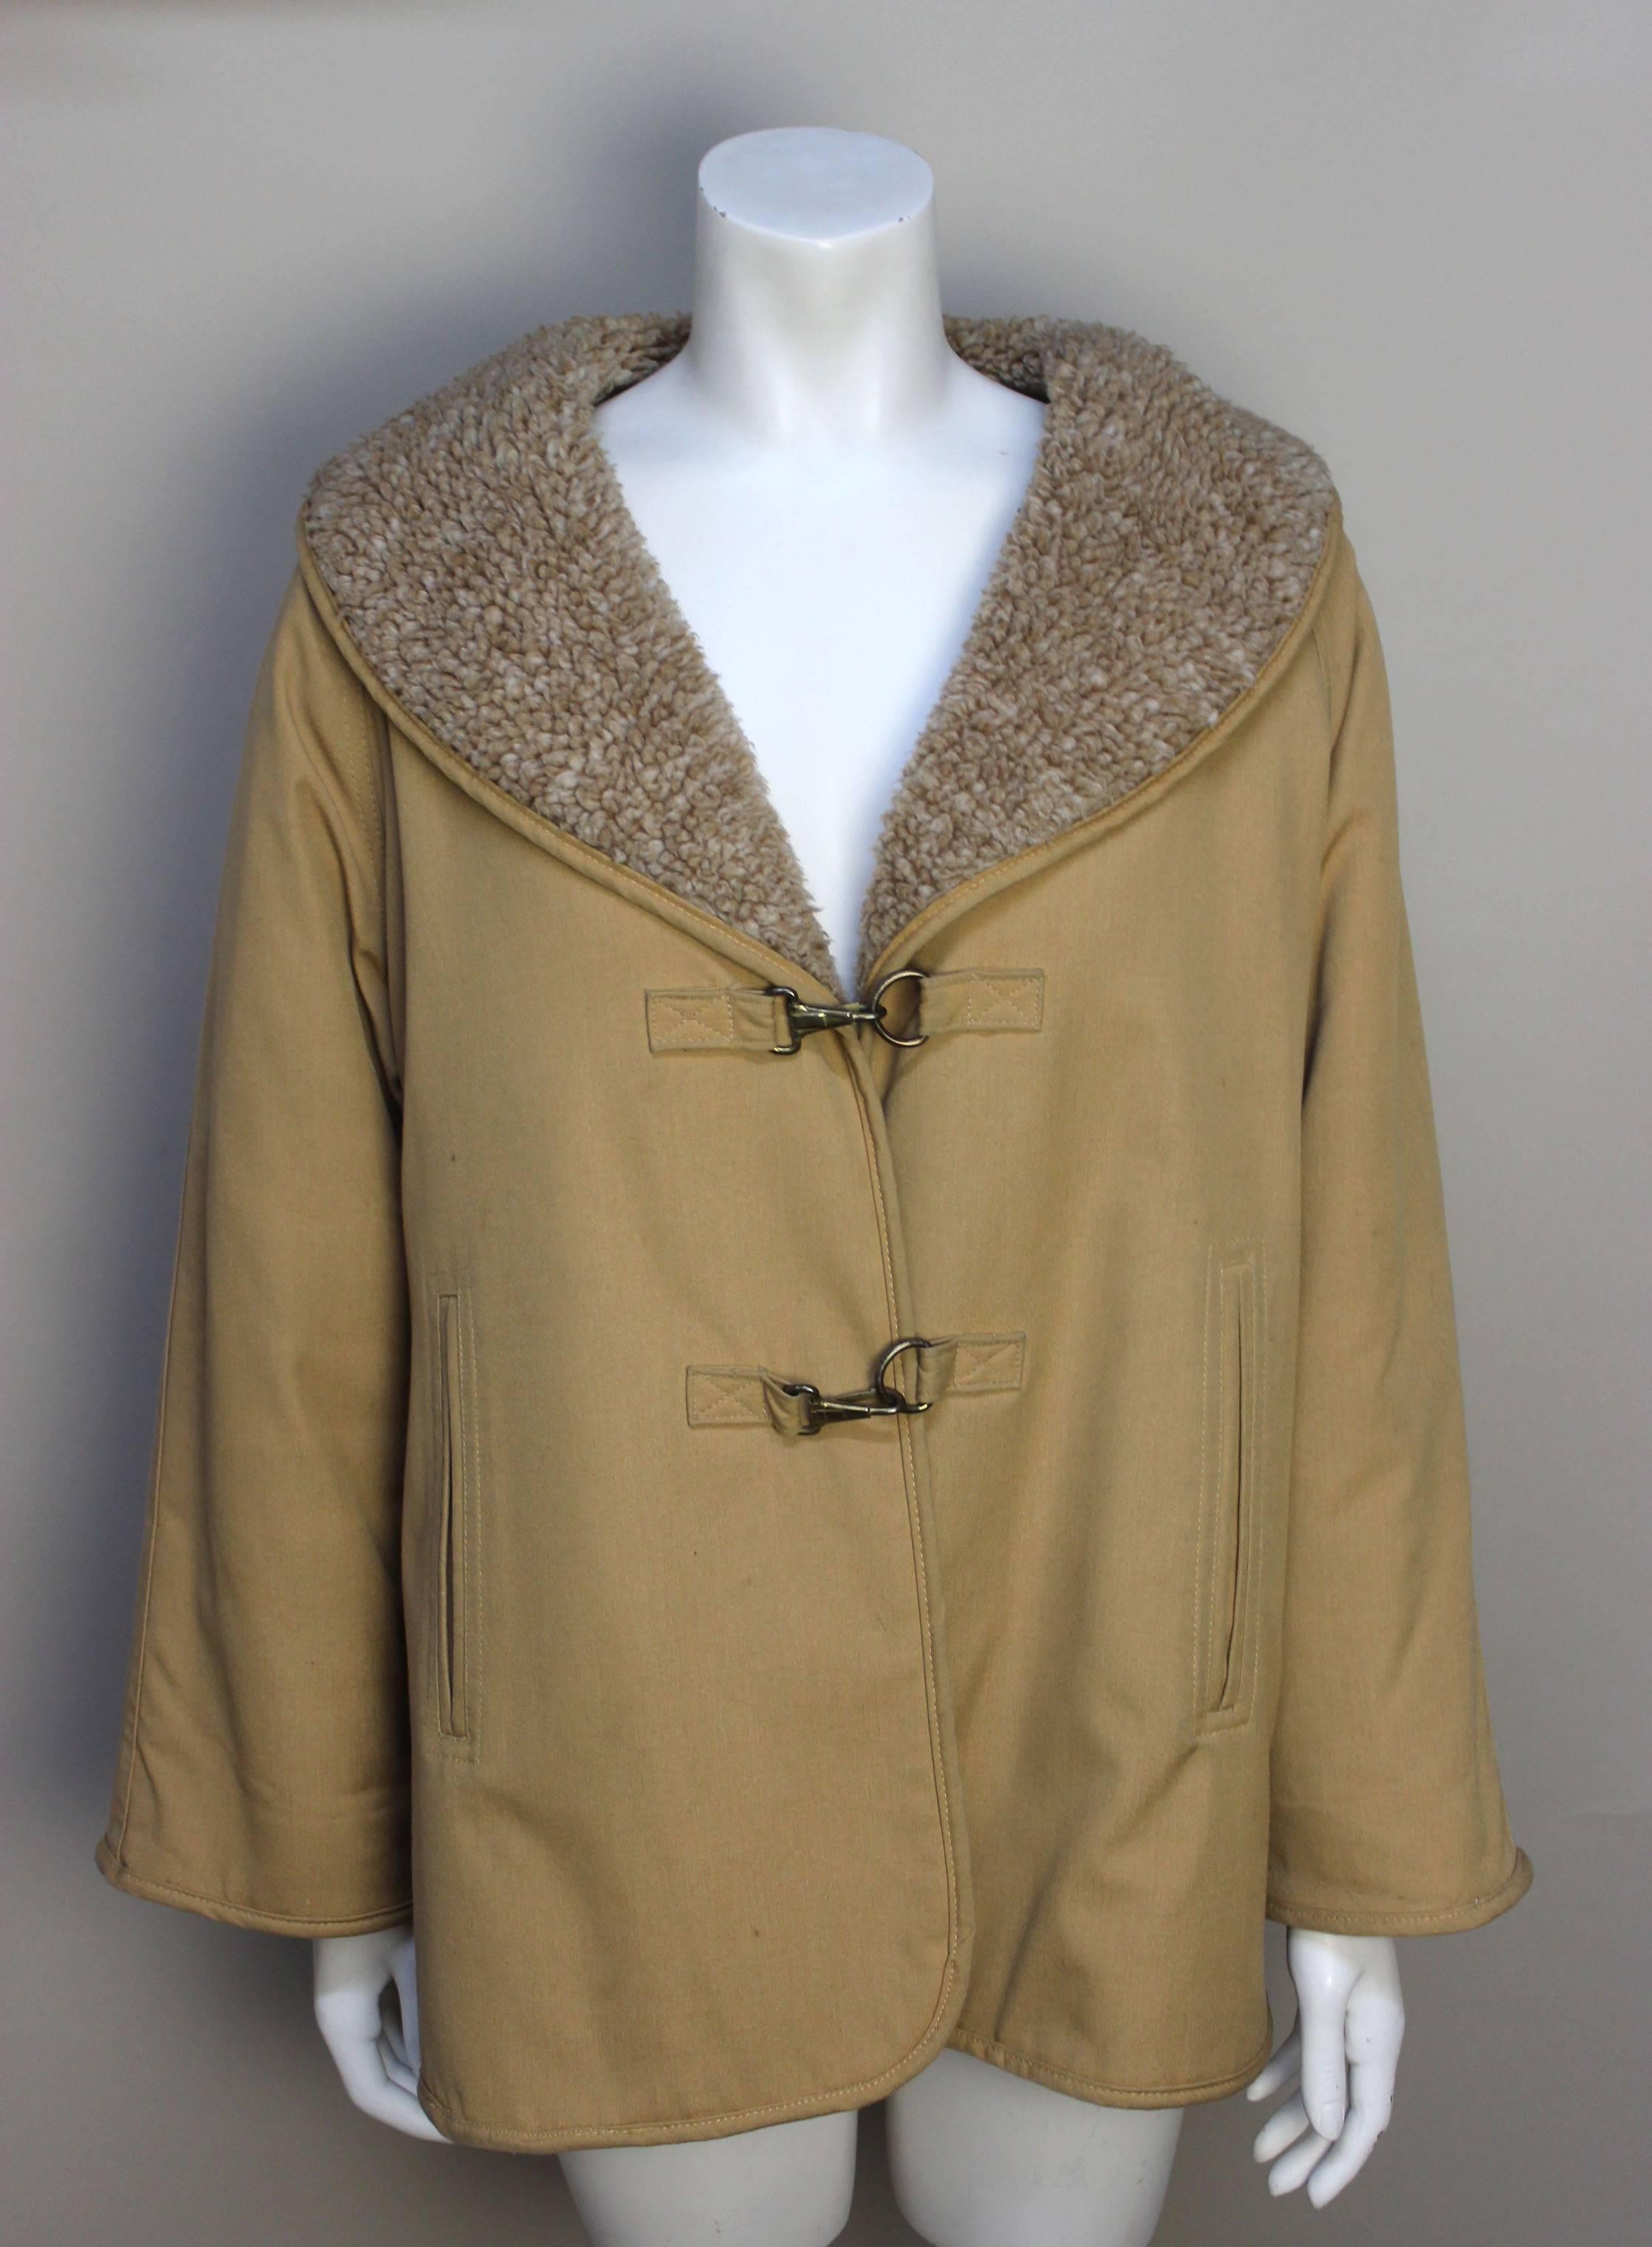 Bonnie Cashin is considered one of the most significant pioneers of American designer sportswear. She initiated the use of industrial hardware on clothing and accesories, most famously the brass toggle. This jacket is a great examle of Bonnie Cashin